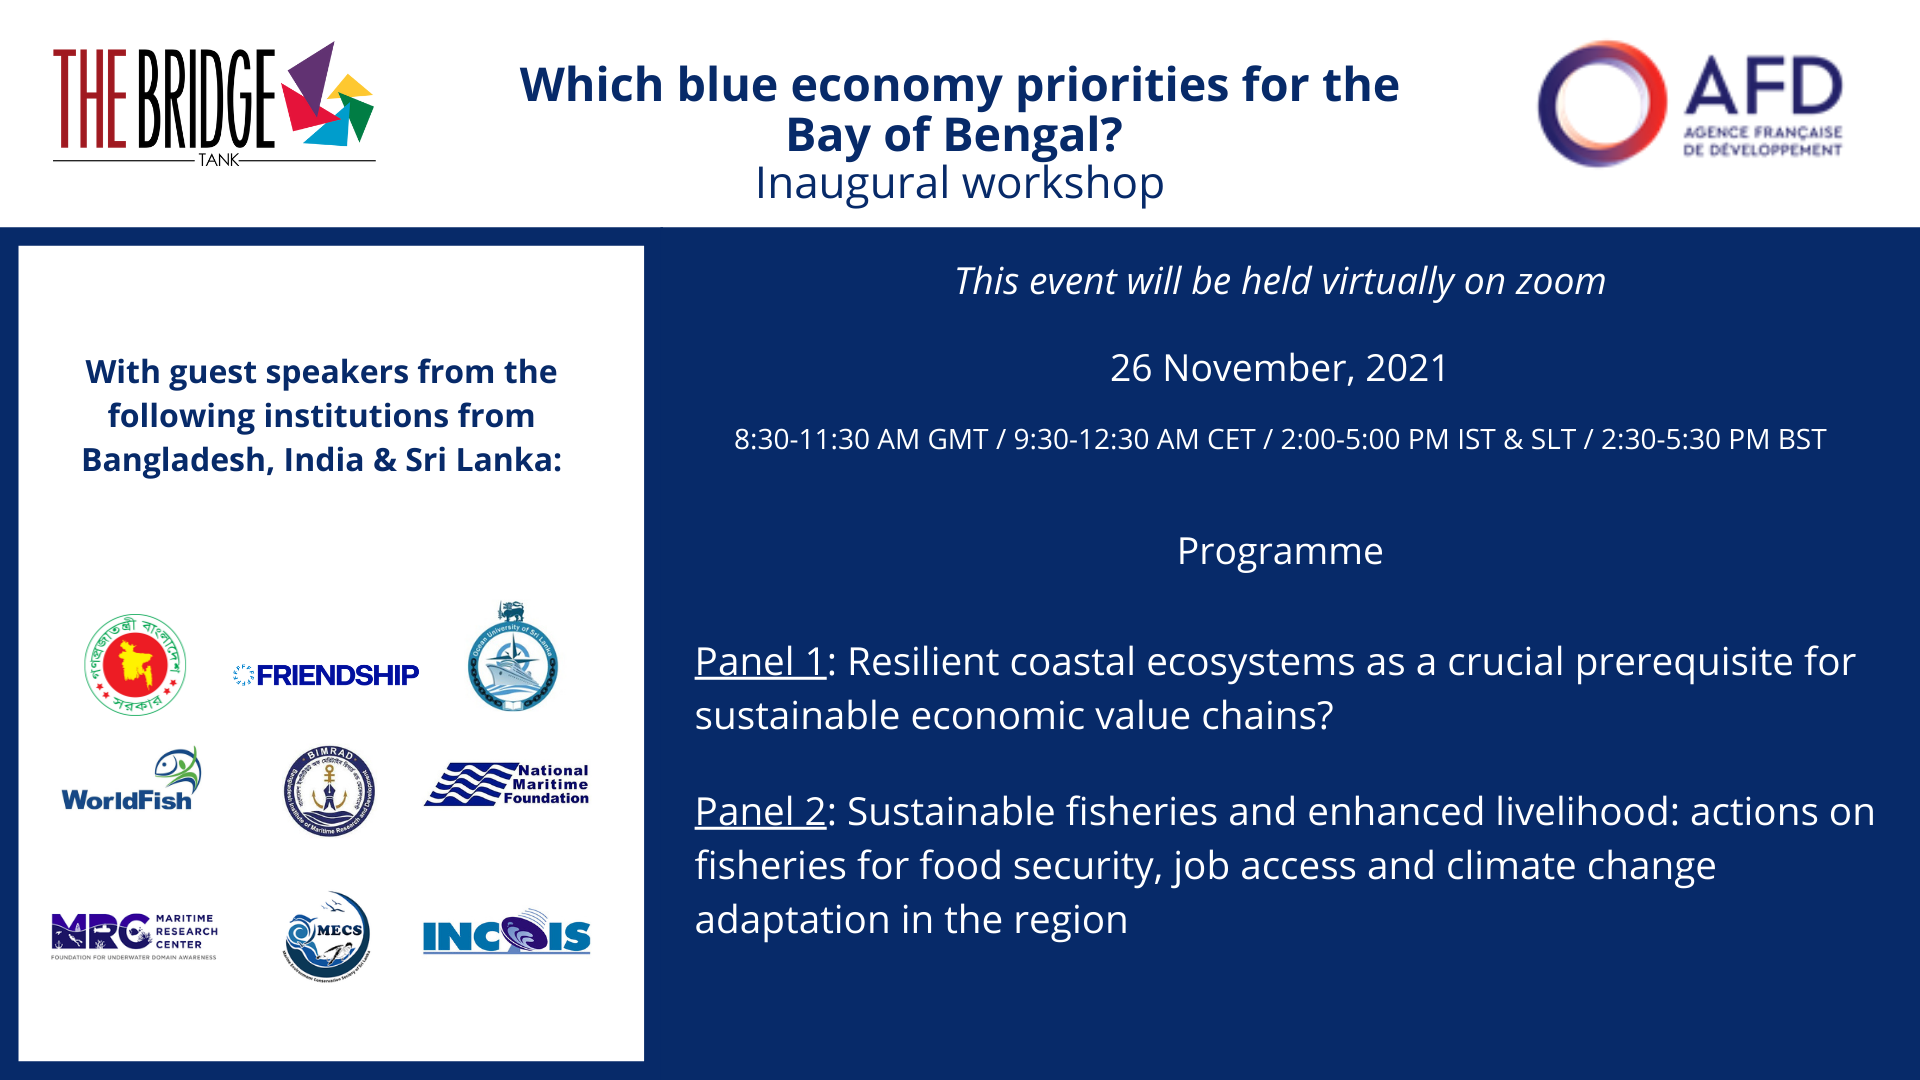 The Bridge Tank and the French Development Agency launched a joint seminar series on blue economy in the Bay of Bengal (Bangladesh, India, Sri Lanka)